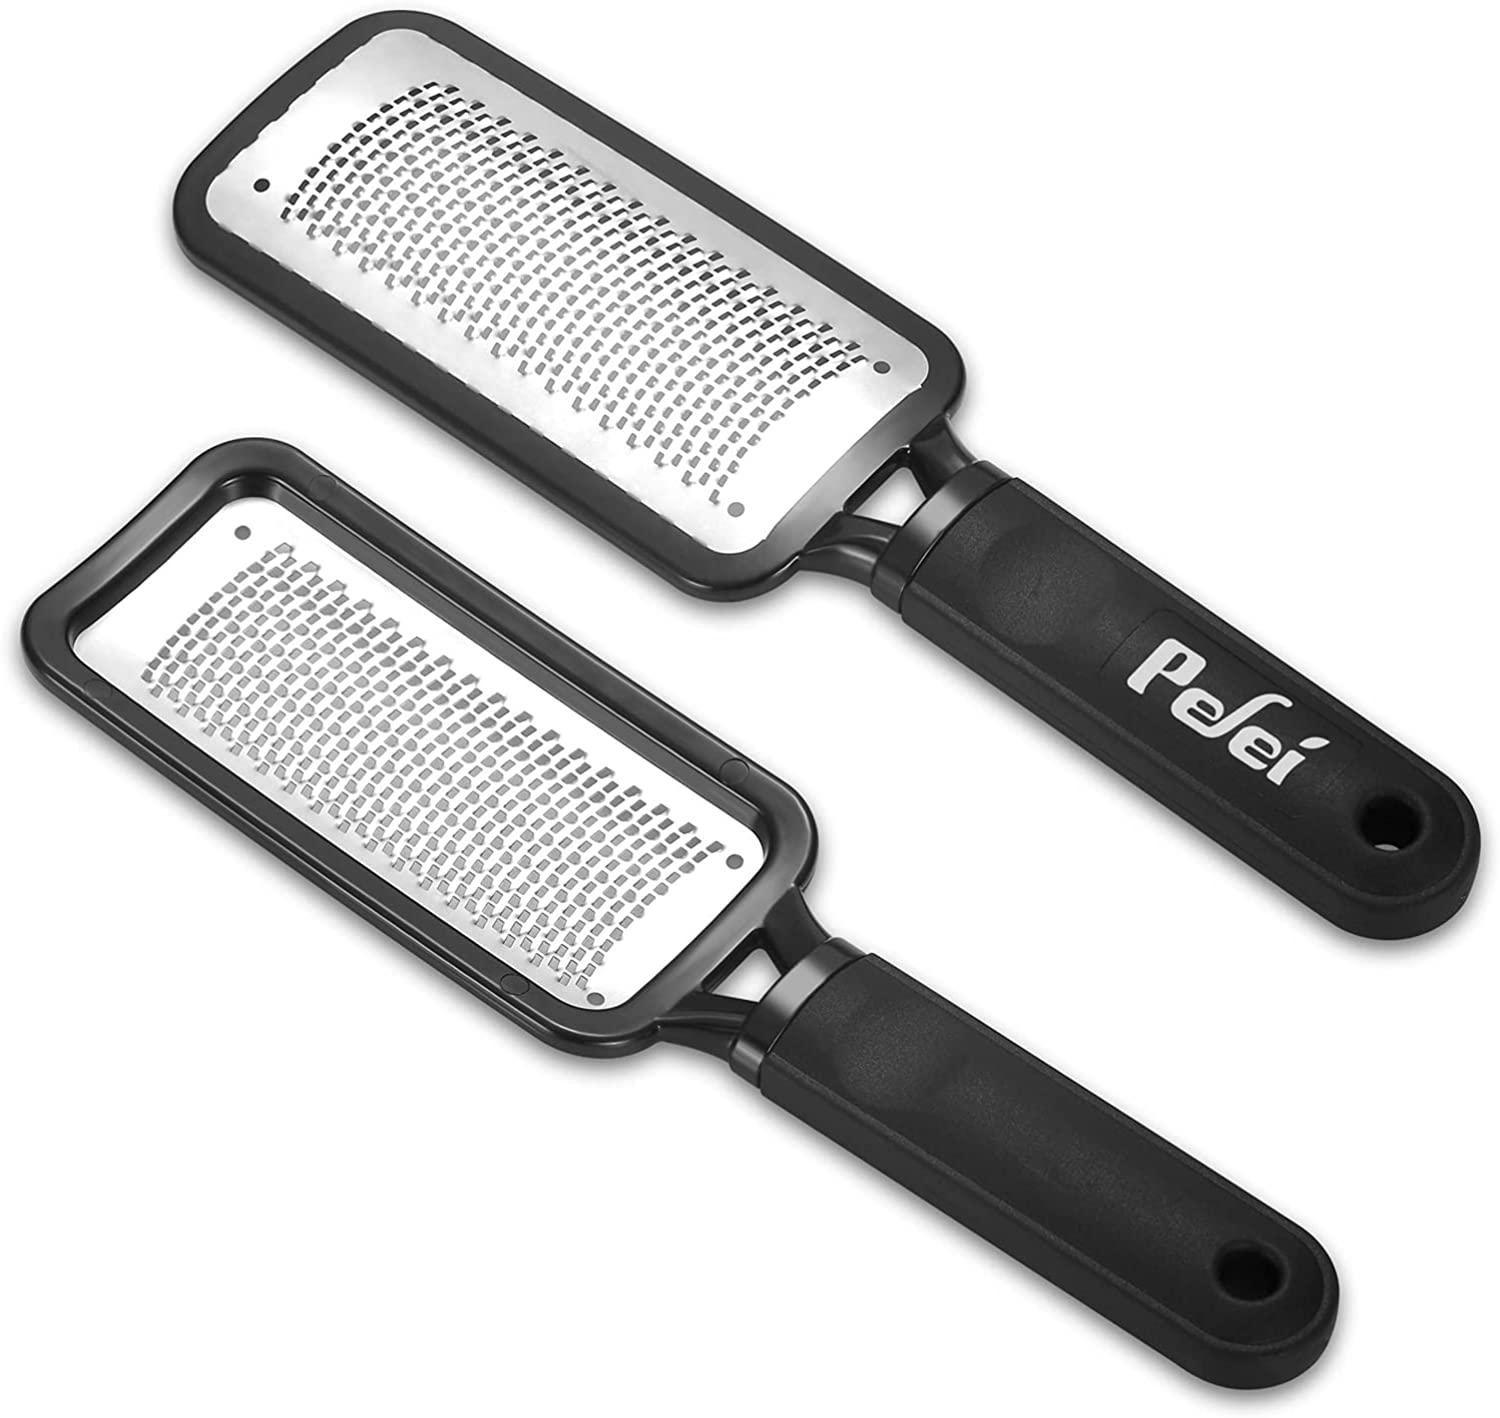 Colossal Foot Rasp Foot File and Callus Remover,Best Foot Care Pedicure Stainless Steel Tool to Remove Hard Skin,Can Be used on Both Wet and Dry